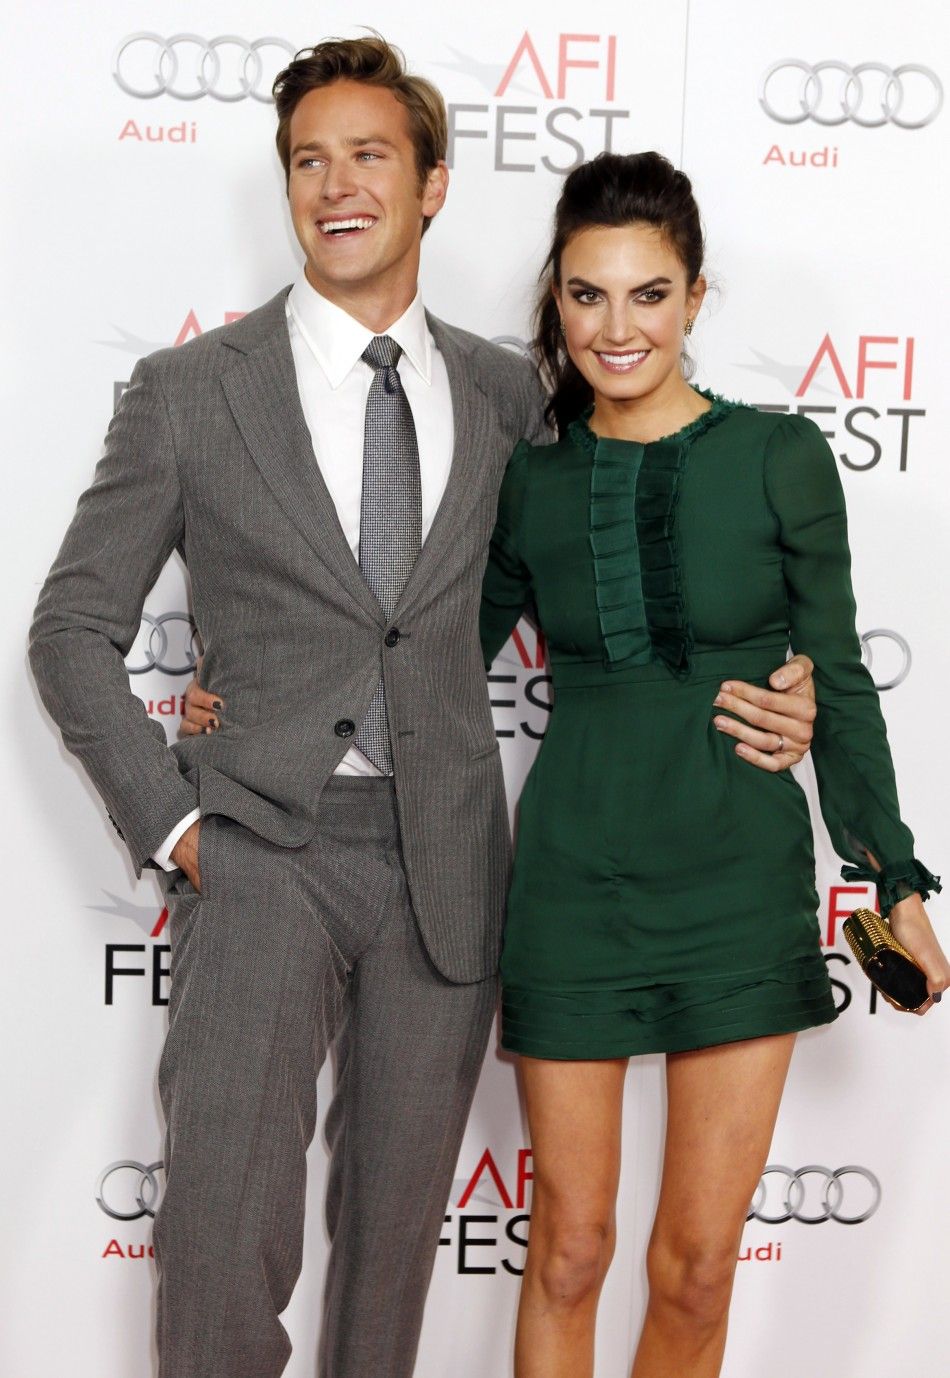 Actor Armie Hammer and wife Elizabeth Chambers pose at the opening night gala for AFI Fest 2011 with the premiere of his new film film quotJ. Edgarquot directed by Clint Eastwood in Hollywood 